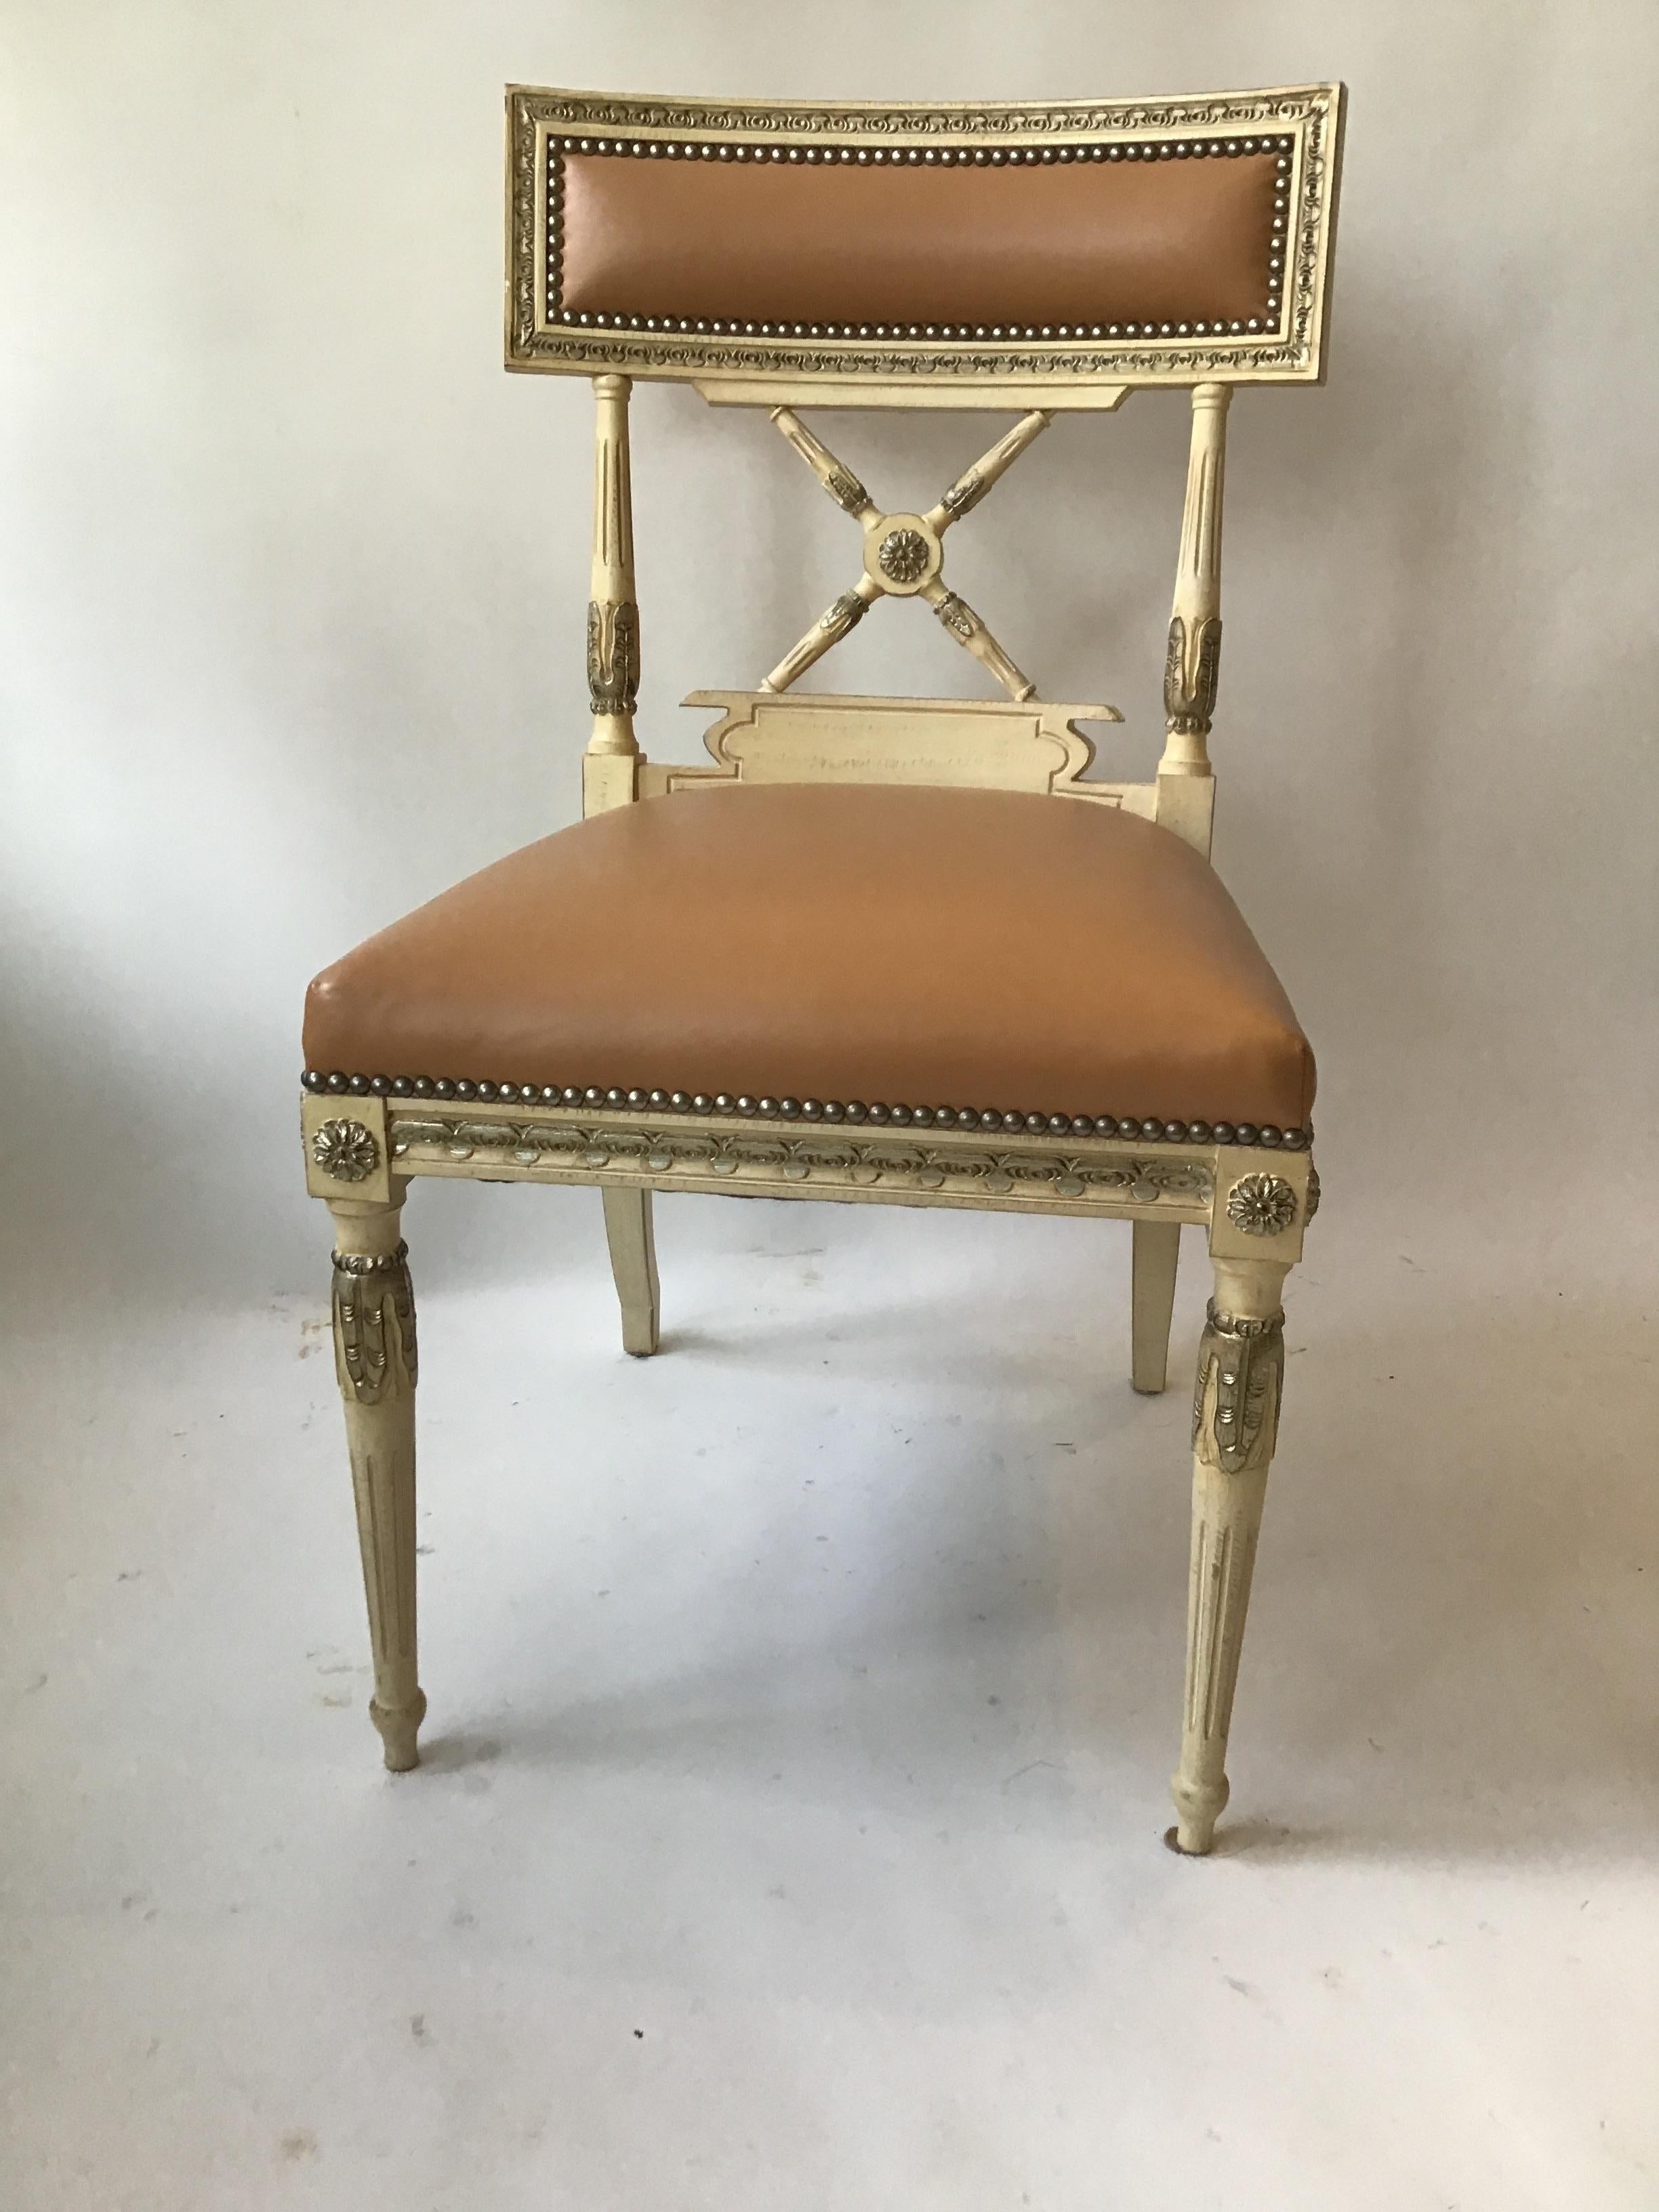 From a celebrities Southampton, NY oceanfront estate. Original cost was 3500.00 per chair. 18 Regency style carved wood dining chairs. Highlighted details in silver leaf. High quality supple faux leather.
 Price is 975.00 per chair. Sold in even